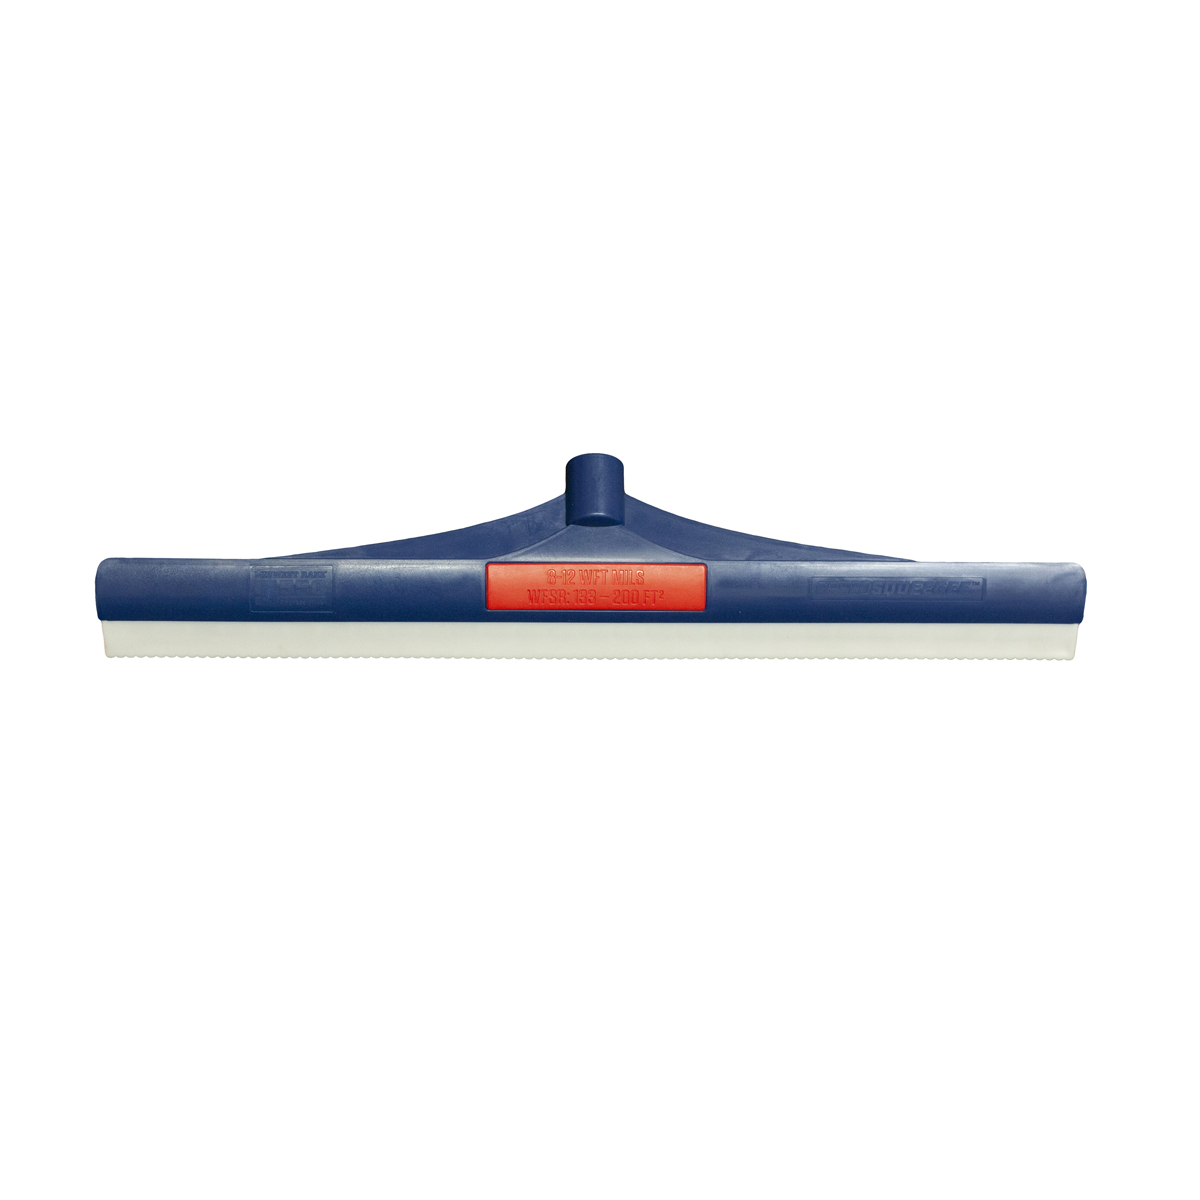 Accuproducts International - Midwest Rake Non-Absorbing Roller Squeegee